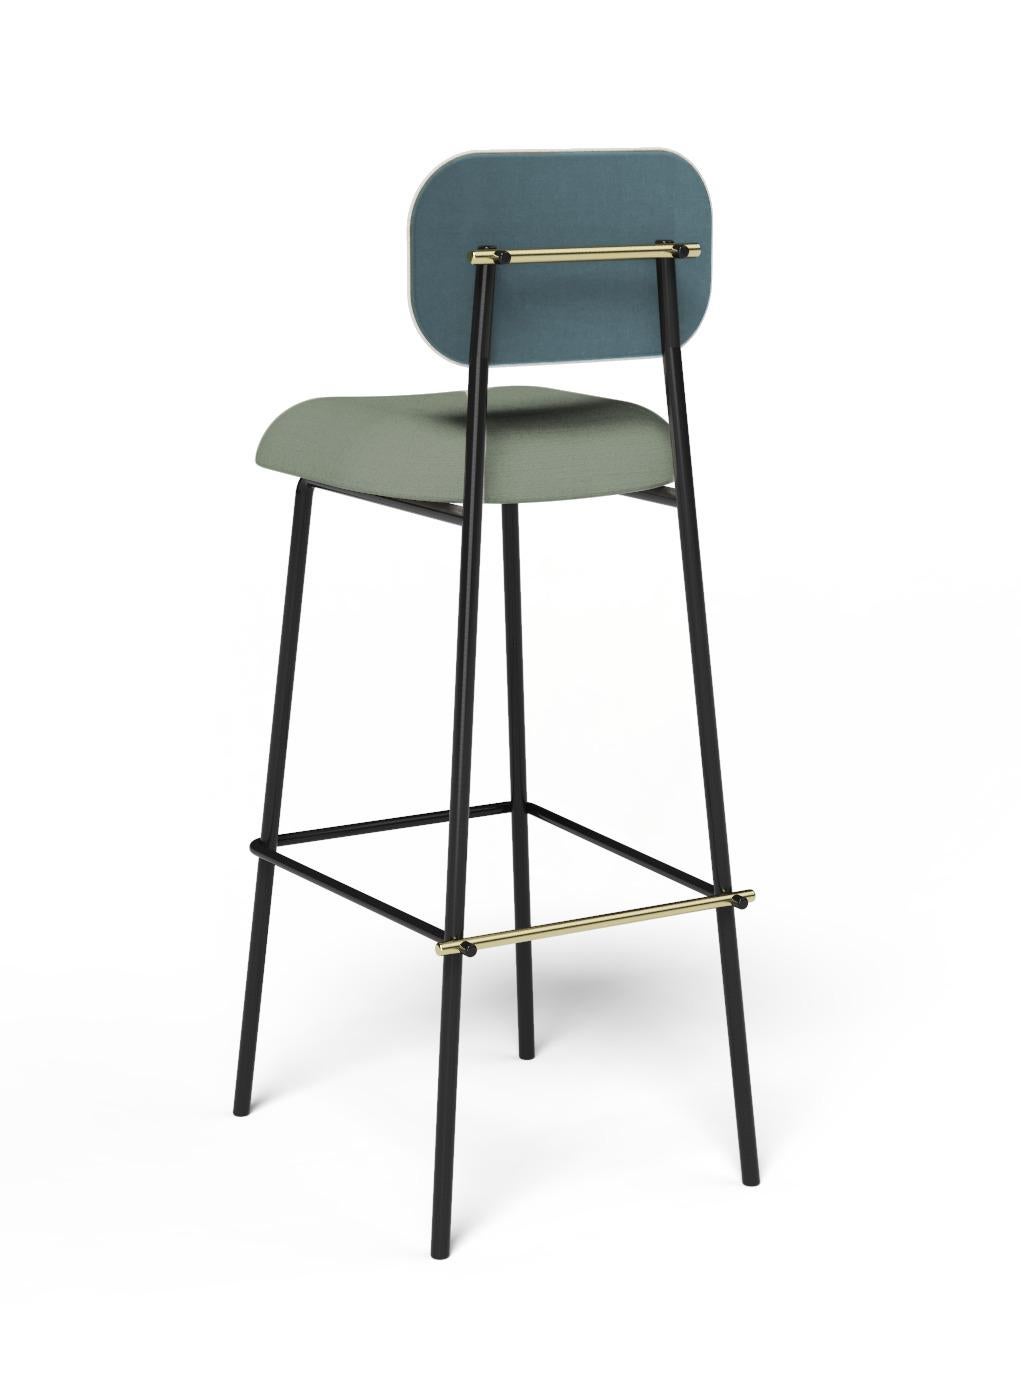 Portuguese Miami Chair by Dooq For Sale